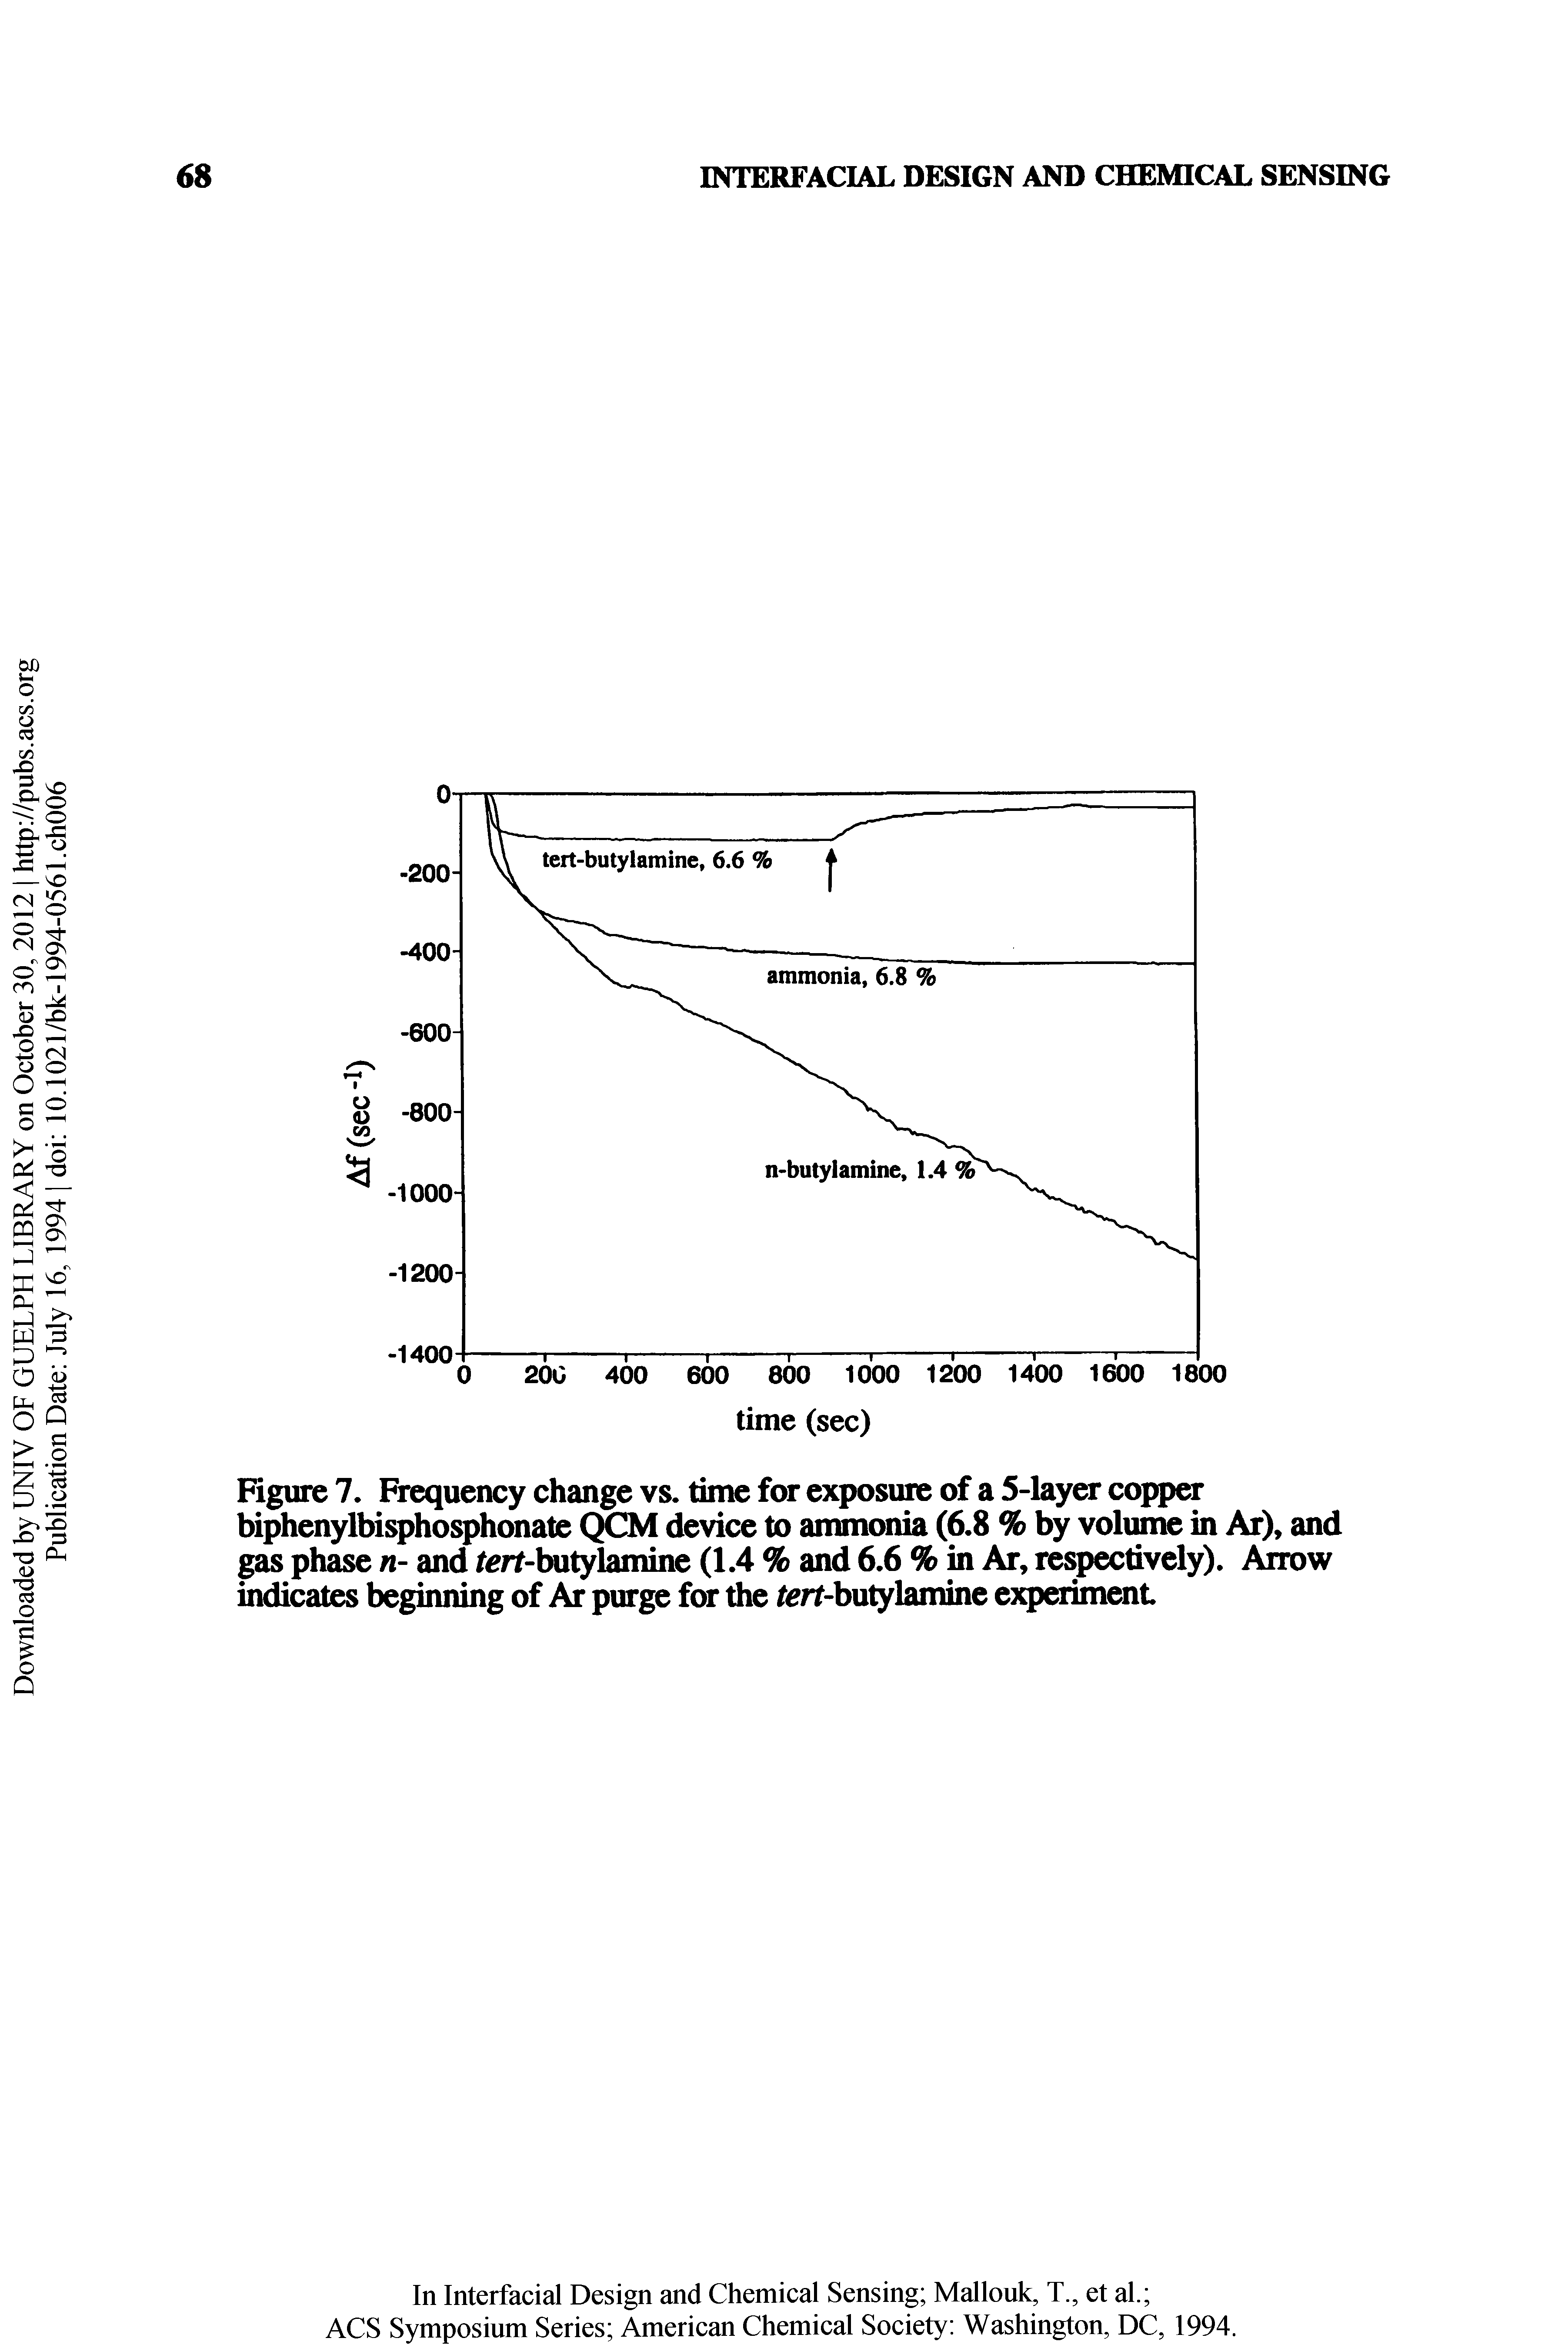 Figure 7. Frequency change vs. time for exposure of a 5-layer copper biphenylbisphosphonate QCM device to ammonia (6.8 % by volume in Ar), and gas phase n- and tert-butylamine (1.4 % and 6.6 % in Ar, respectively). Airow indicates beginning of Ar purge for the /<e/t-butylamine experiment...